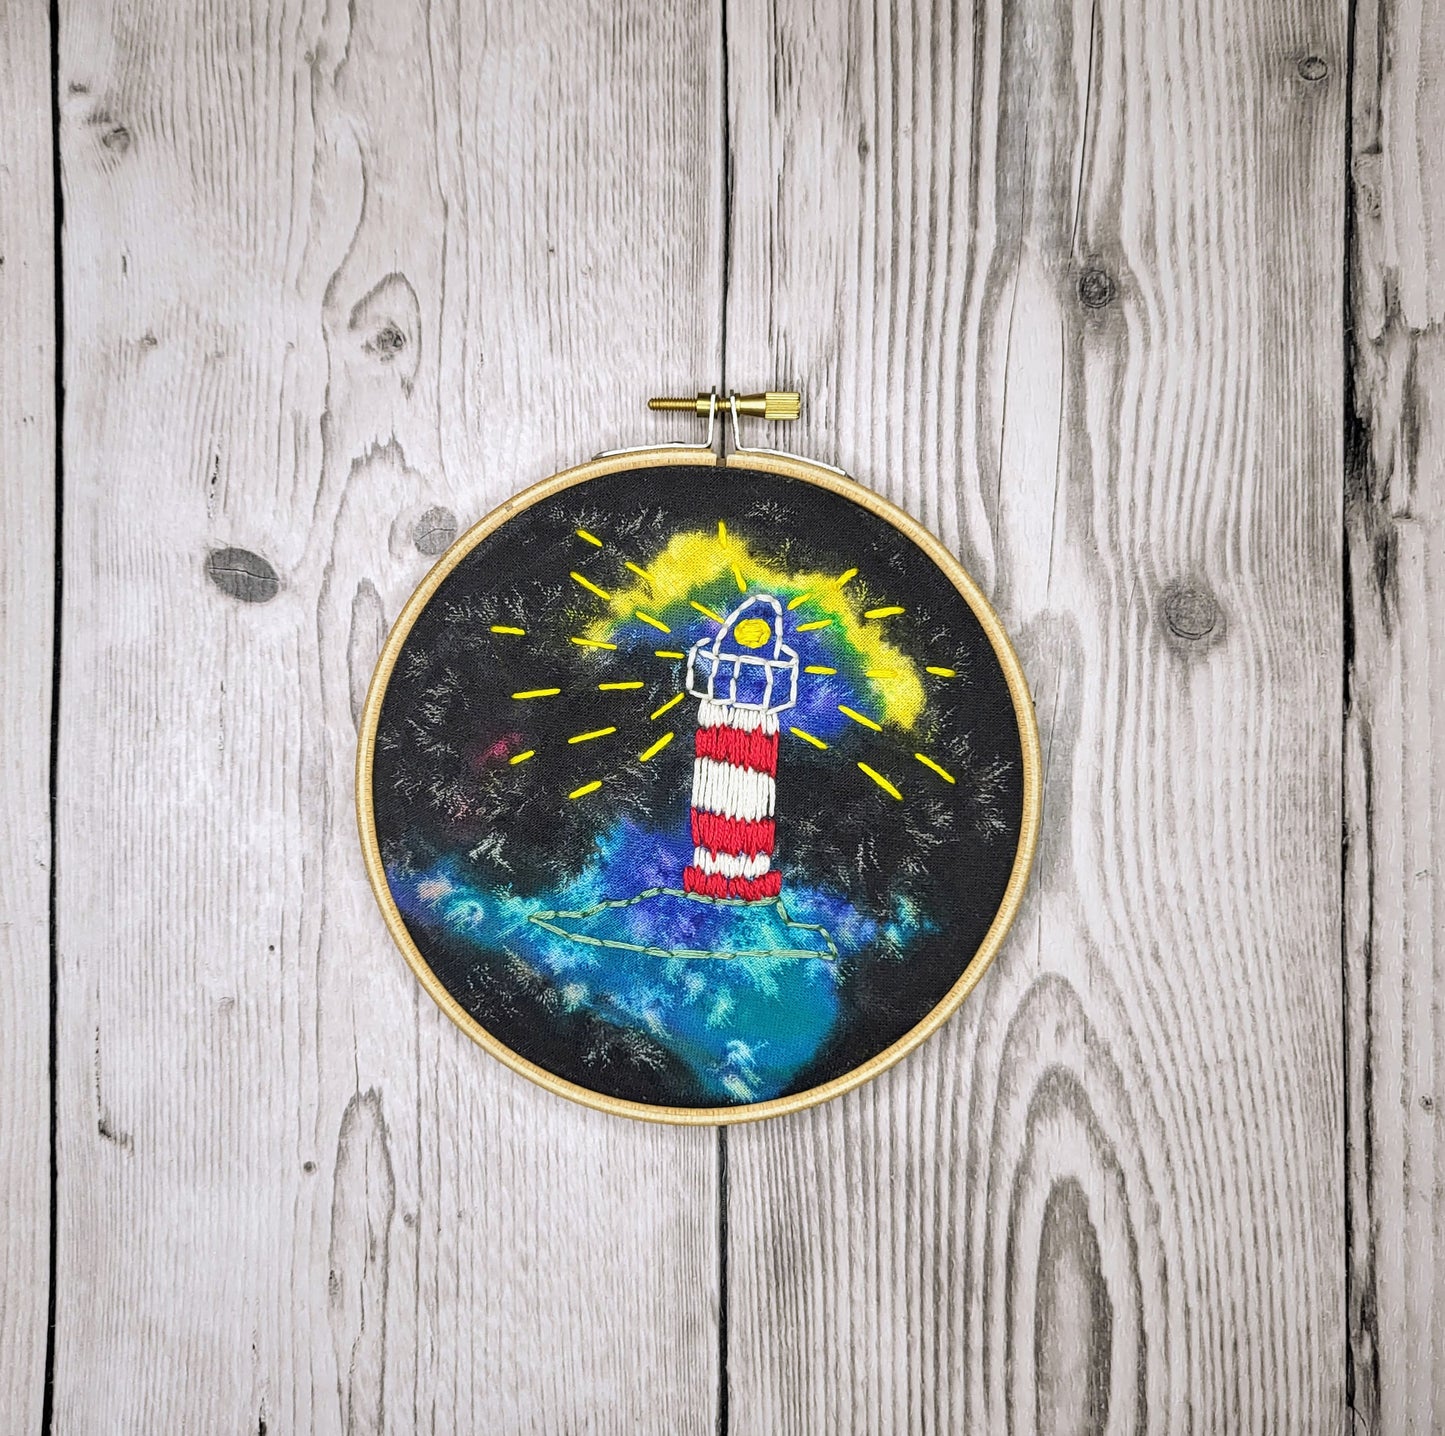 Embroidered Artwork - lighthouse at night - red and white